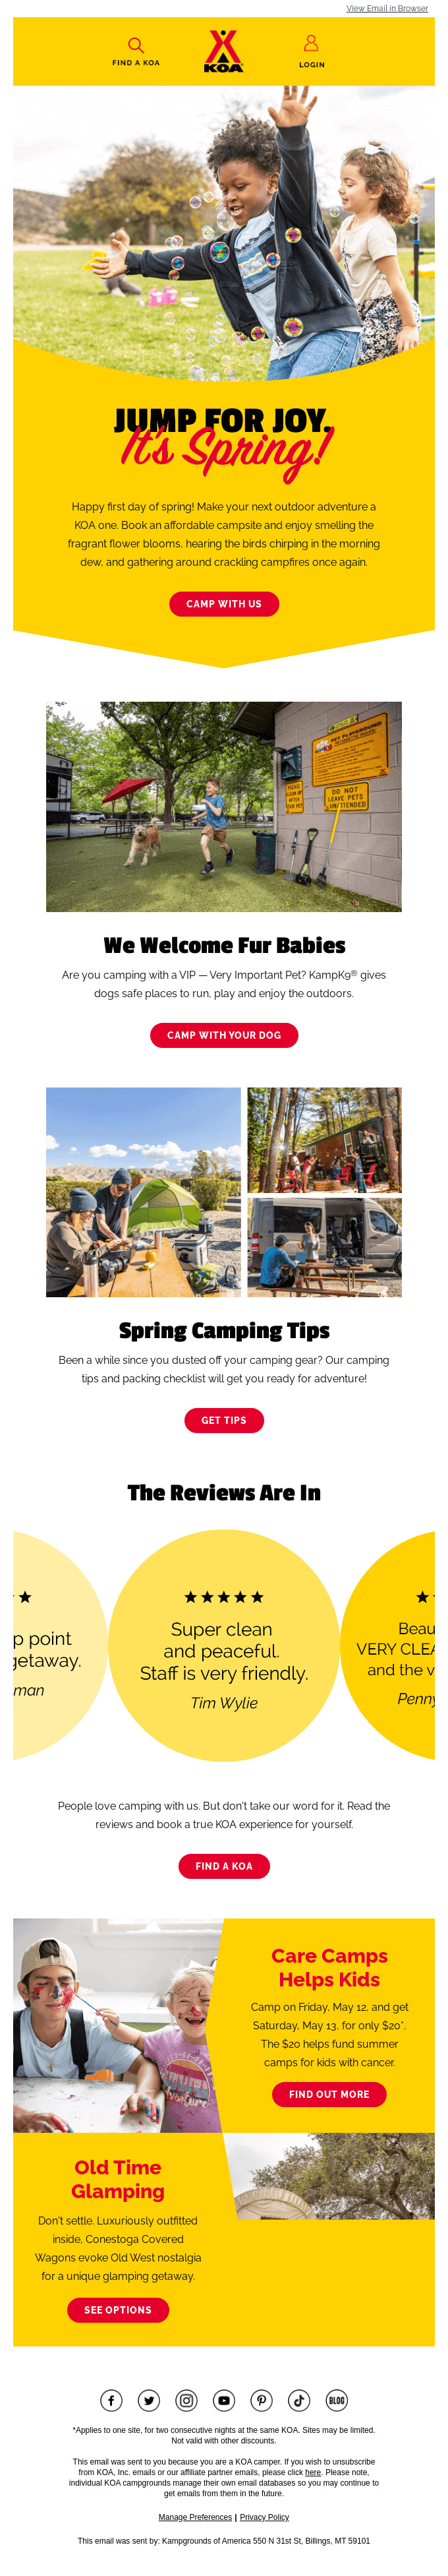 March Email Newsletter Examples